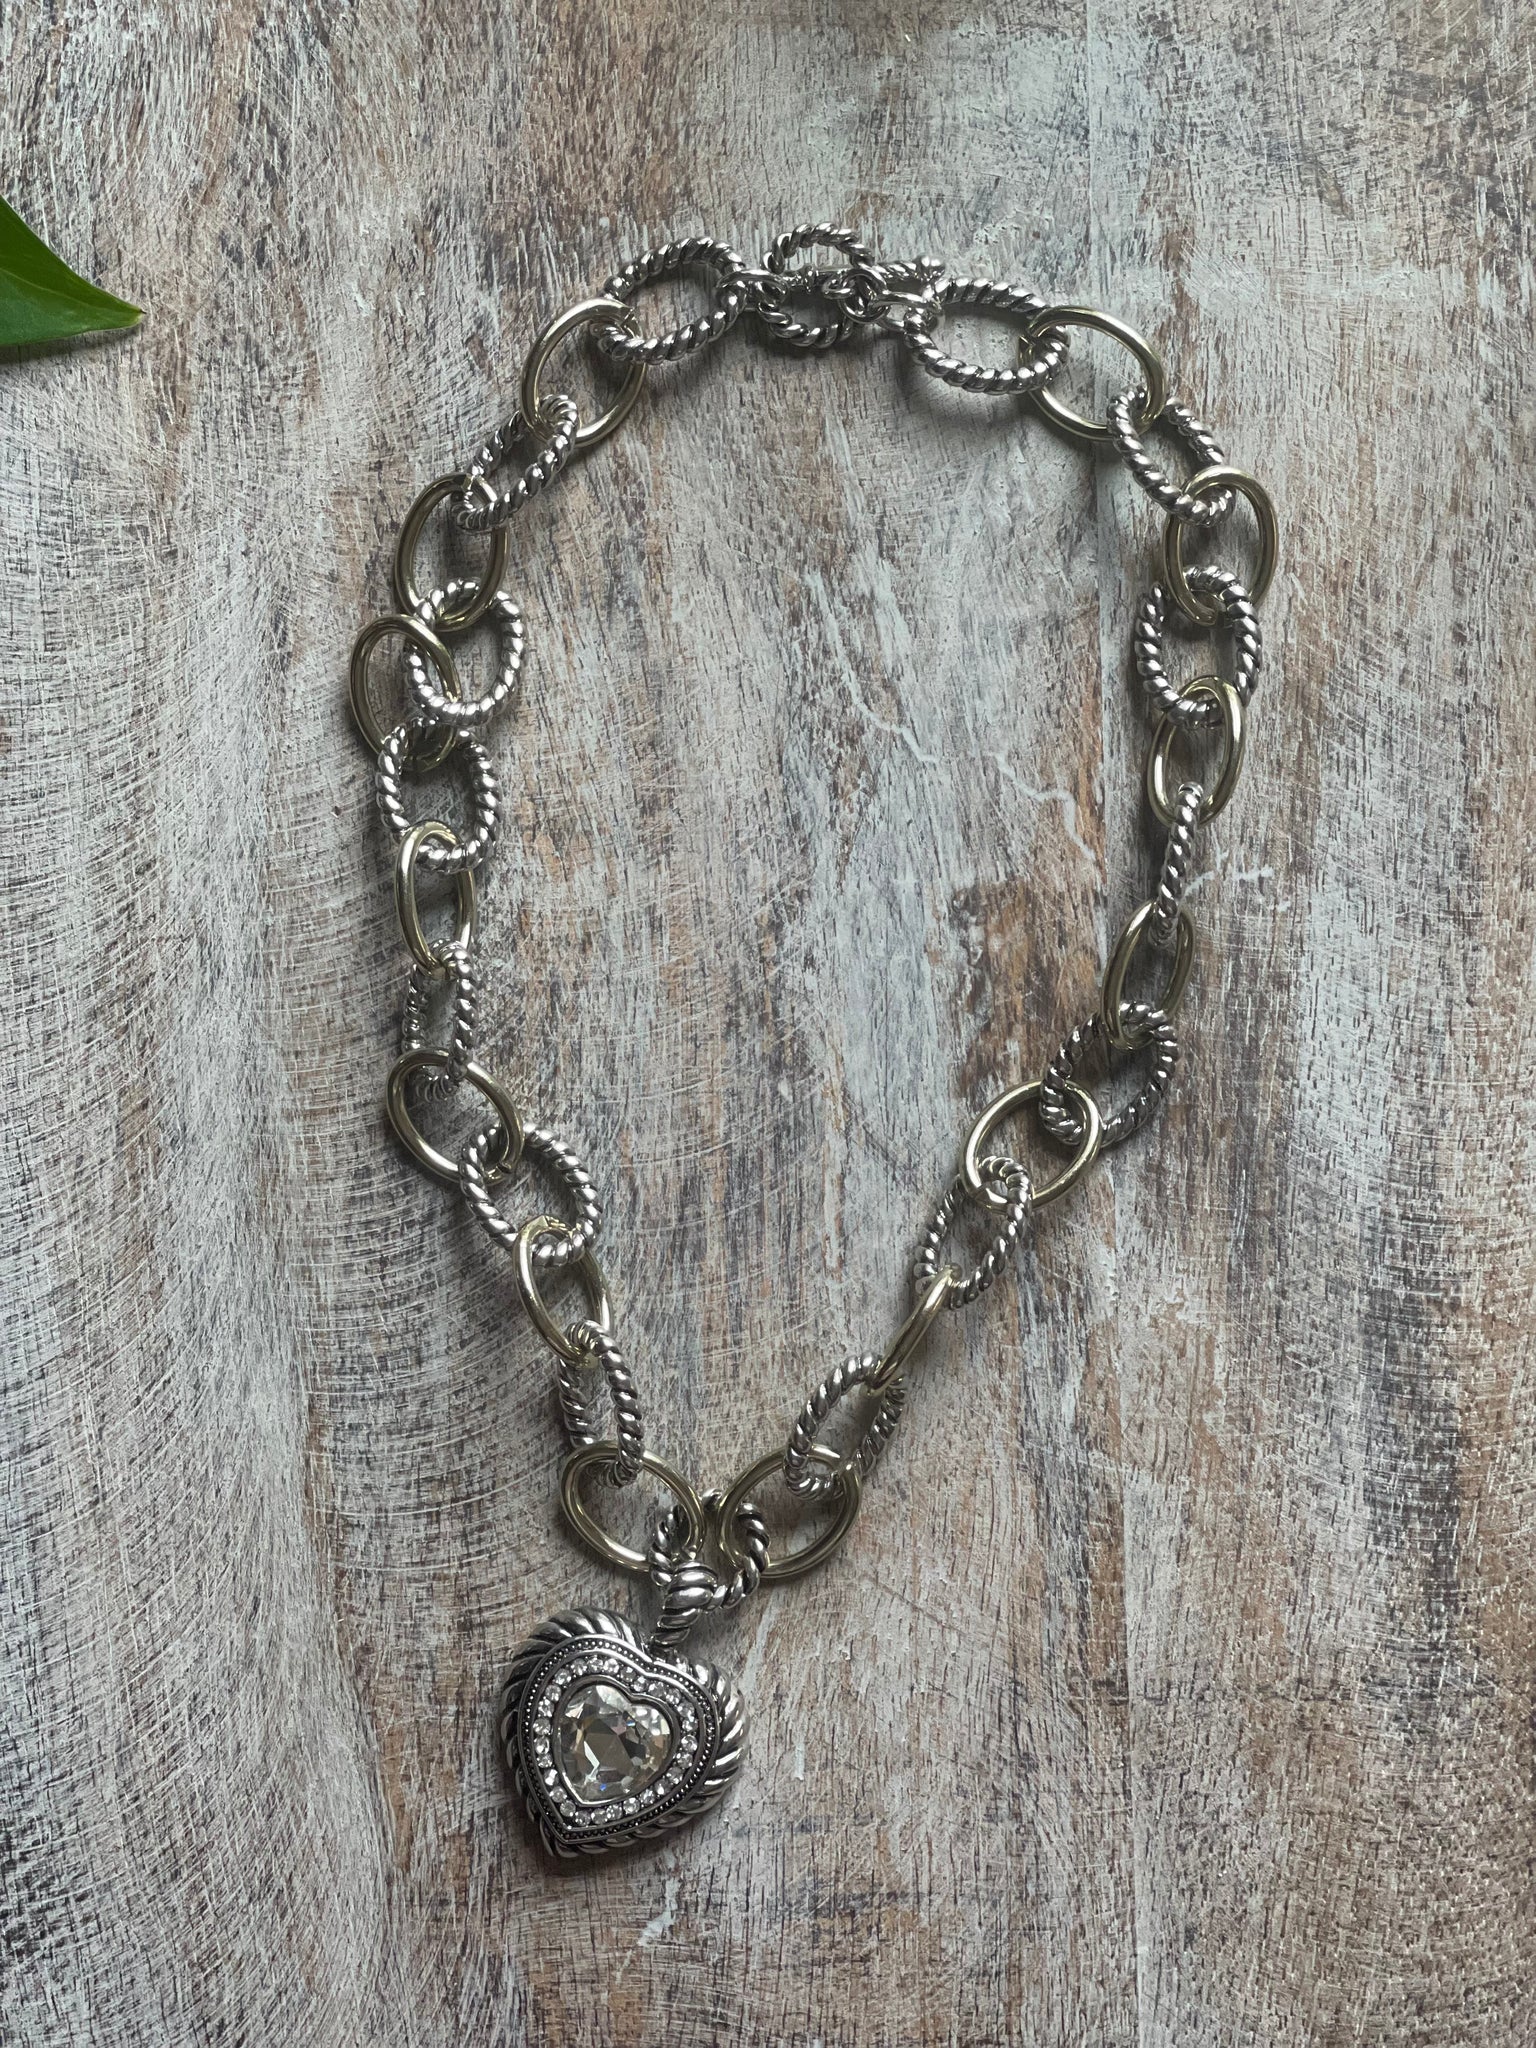 Heart Shaped Crystal Pendant on Link Chain Necklace 